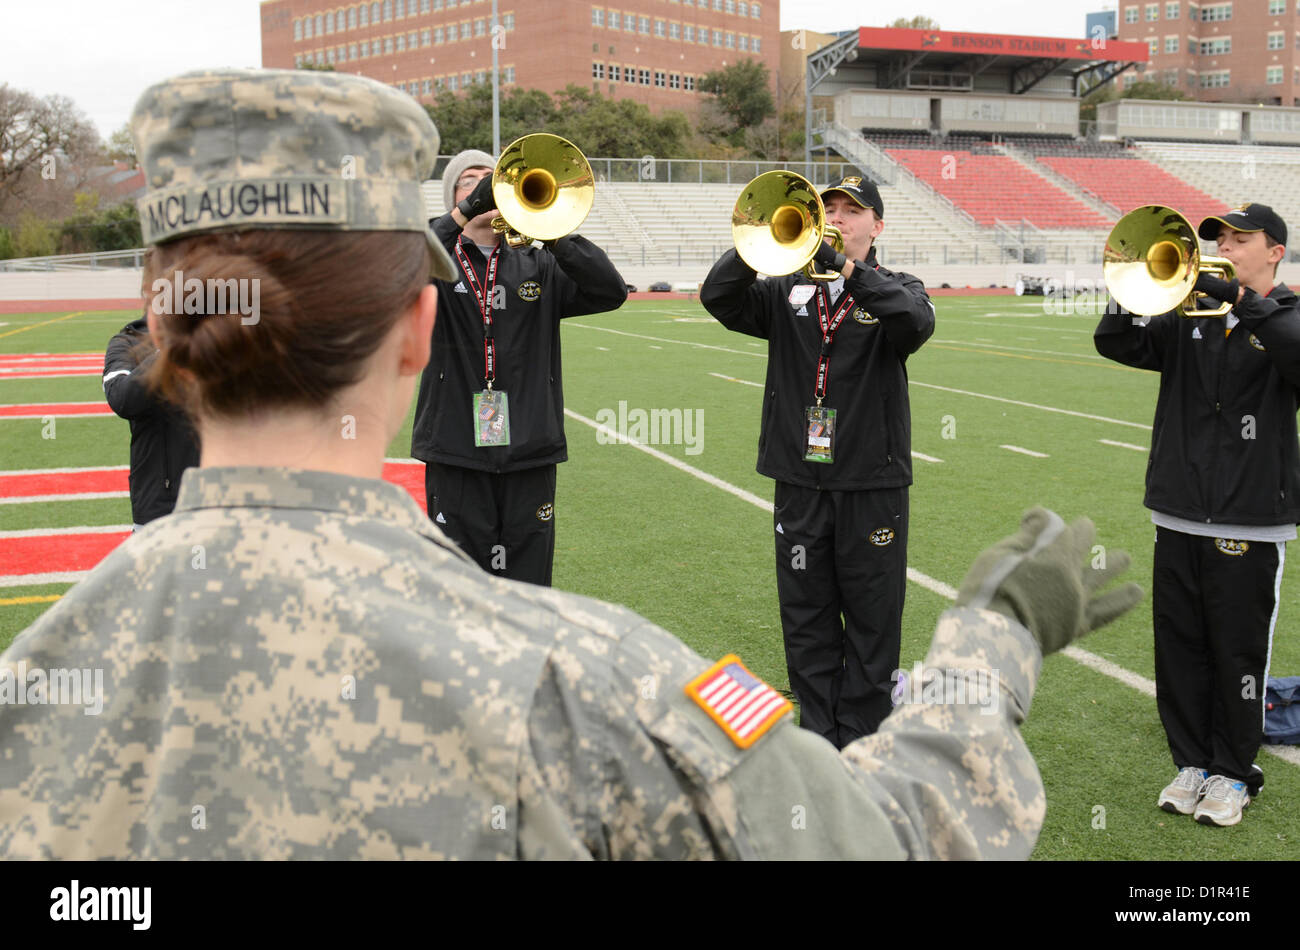 Staff Sgt. Becky McLaughlin conducts members of the U.S. All-American Band at Benson Stadium in San Antonio Jan. on 2, 2013. The U.S. Army All-American Band are scheduled to perform during the U.S. Army All-American Bowl on Jan. 5. (U.S. Army photo by Pfc. Victor Blanco, 205th Public Affairs Operations Center) Stock Photo